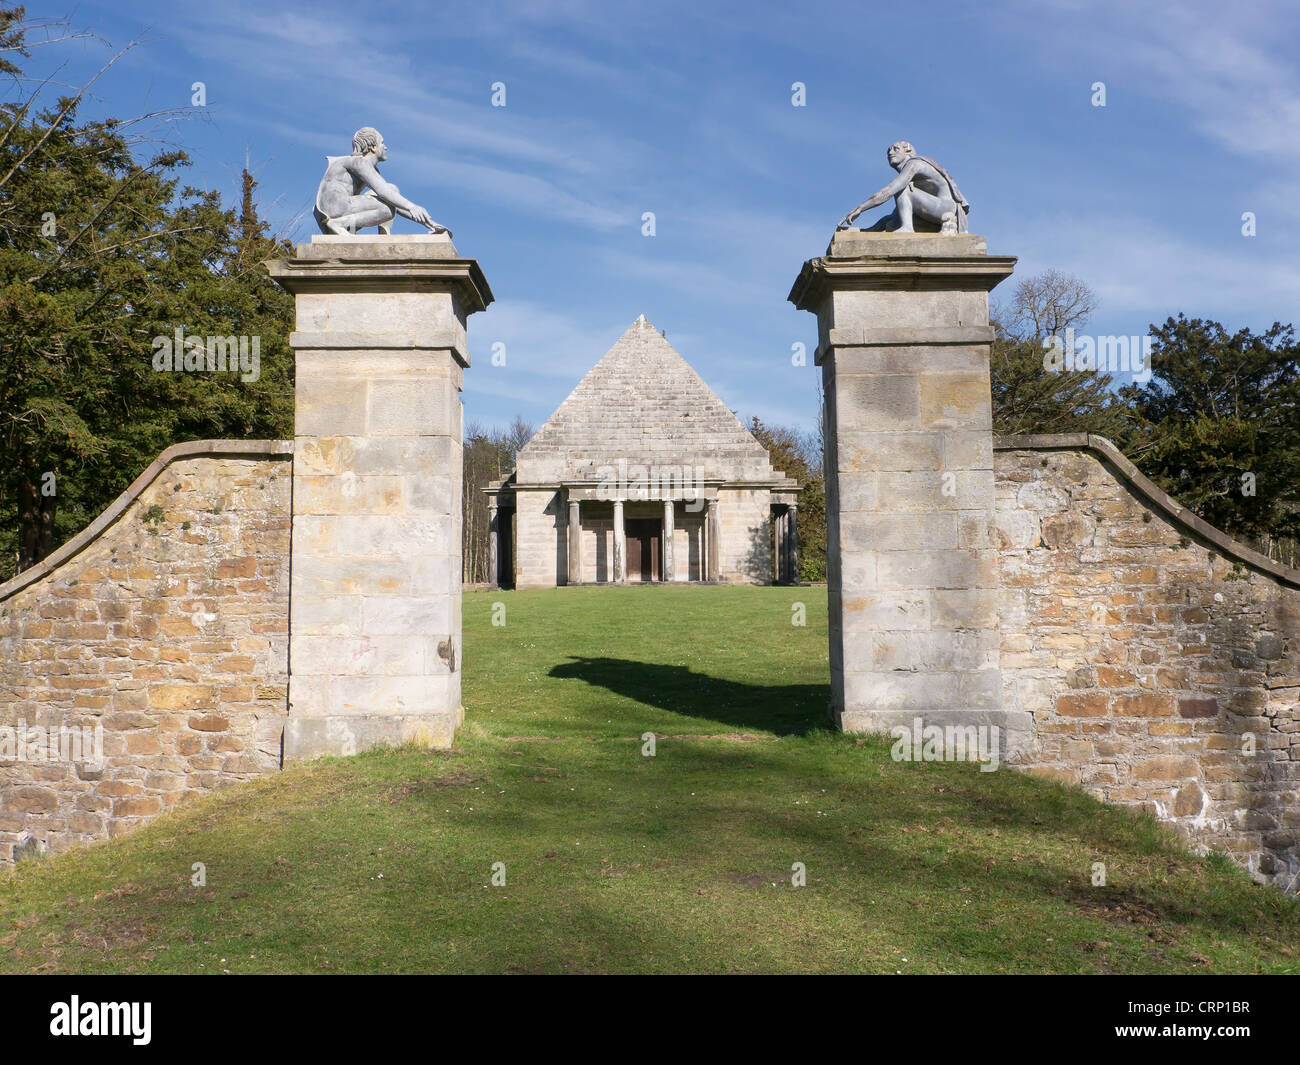 The pyramid shaped mausoleum at Gosford House, Aberlady, East Lothian. It holds the remains of the 7th Earl of Wemyss. Stock Photo